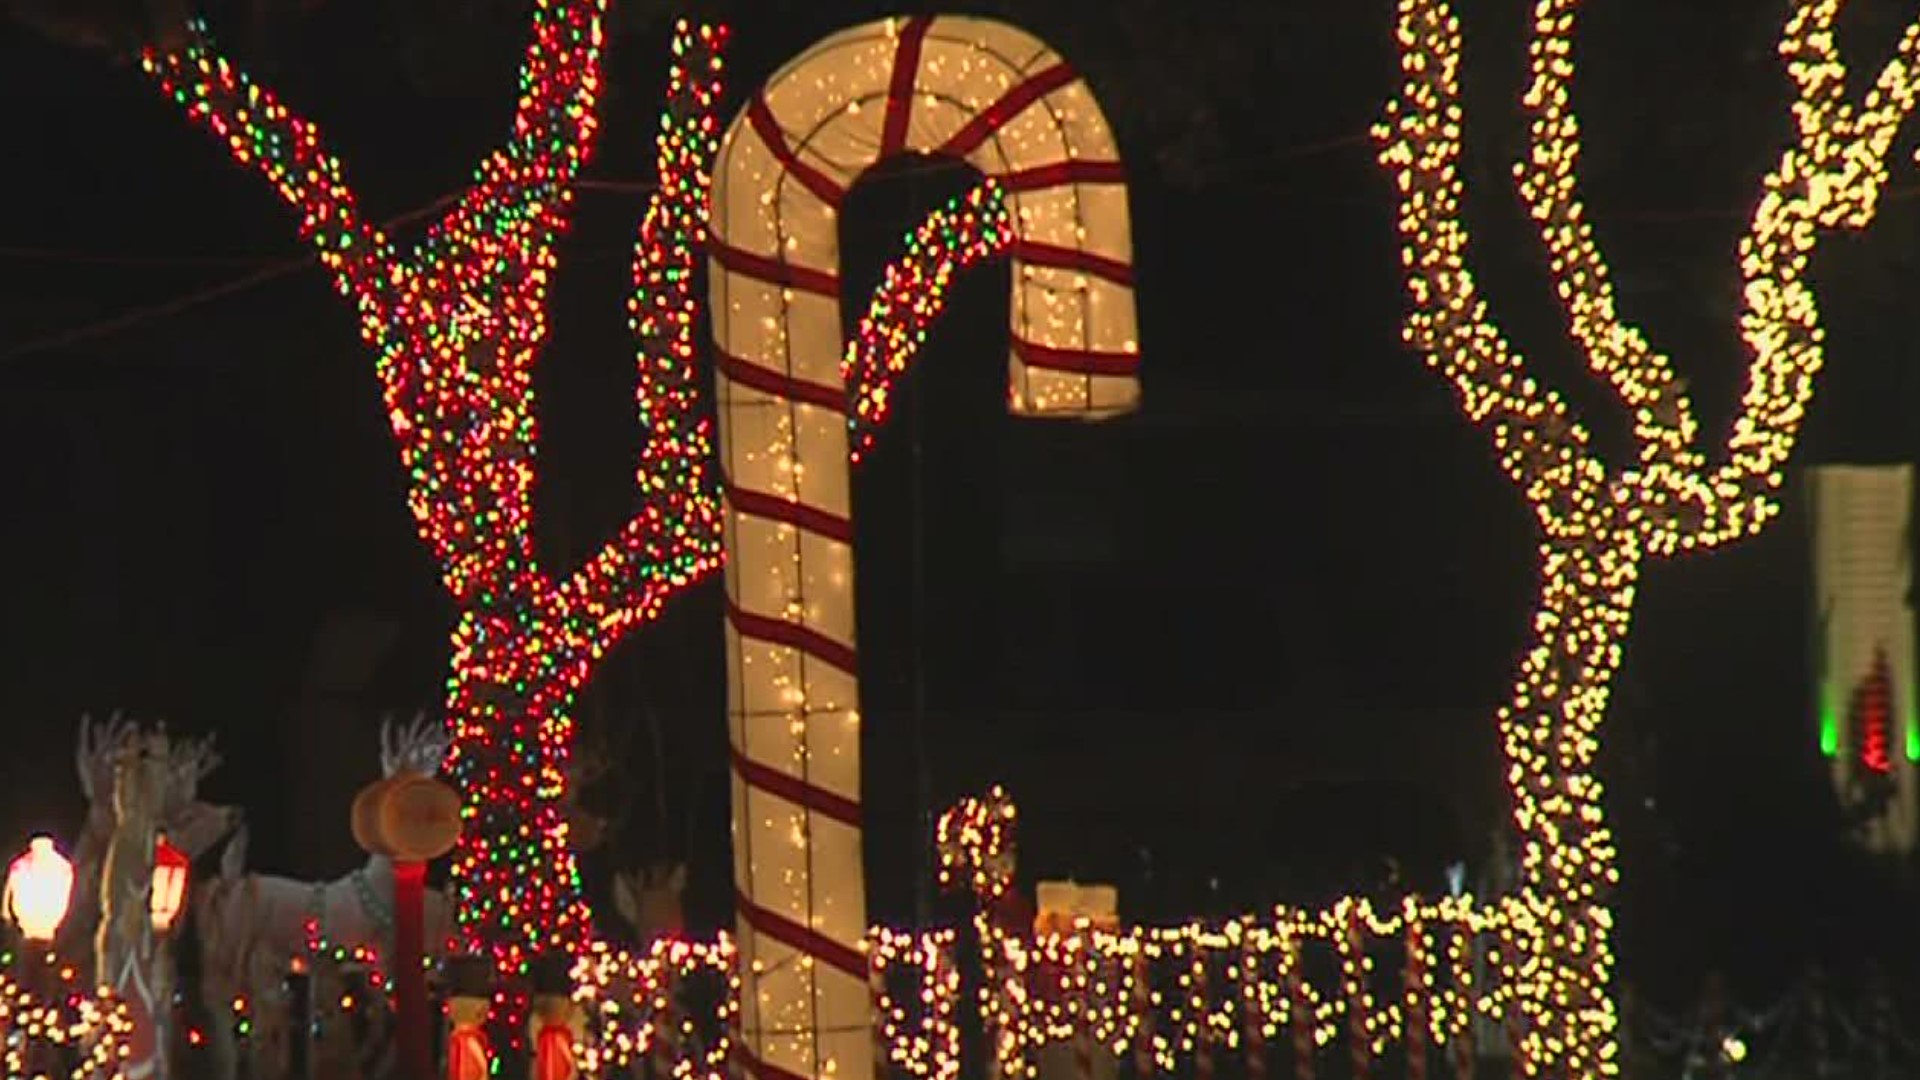 Candy Cane Lane welcomes the community every year, and it's been that way for decades.